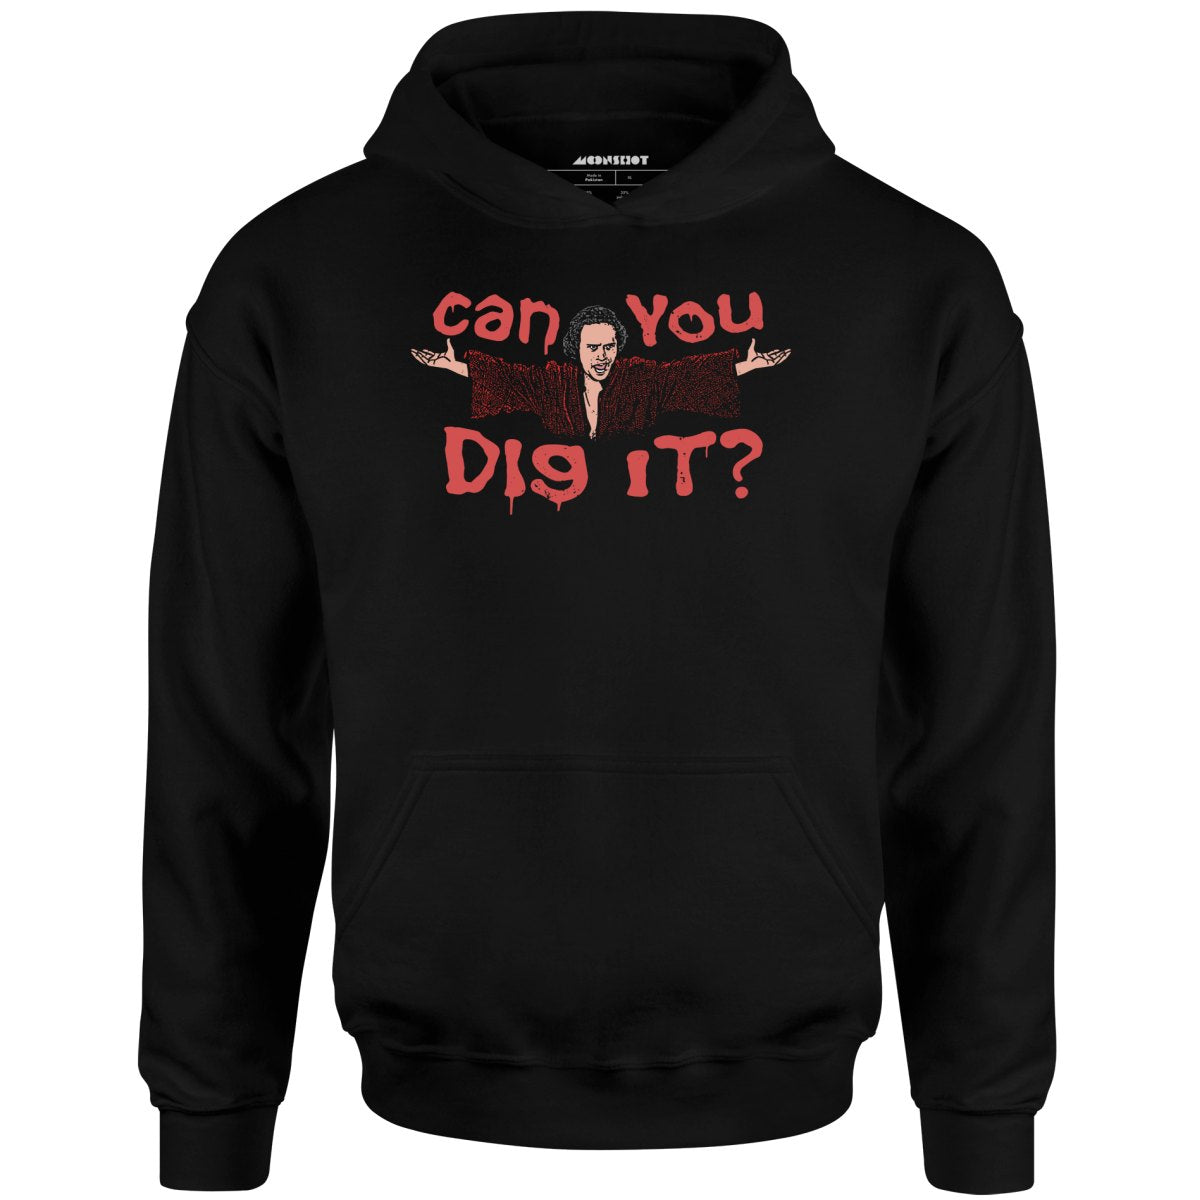 Can You Dig It? - Unisex Hoodie